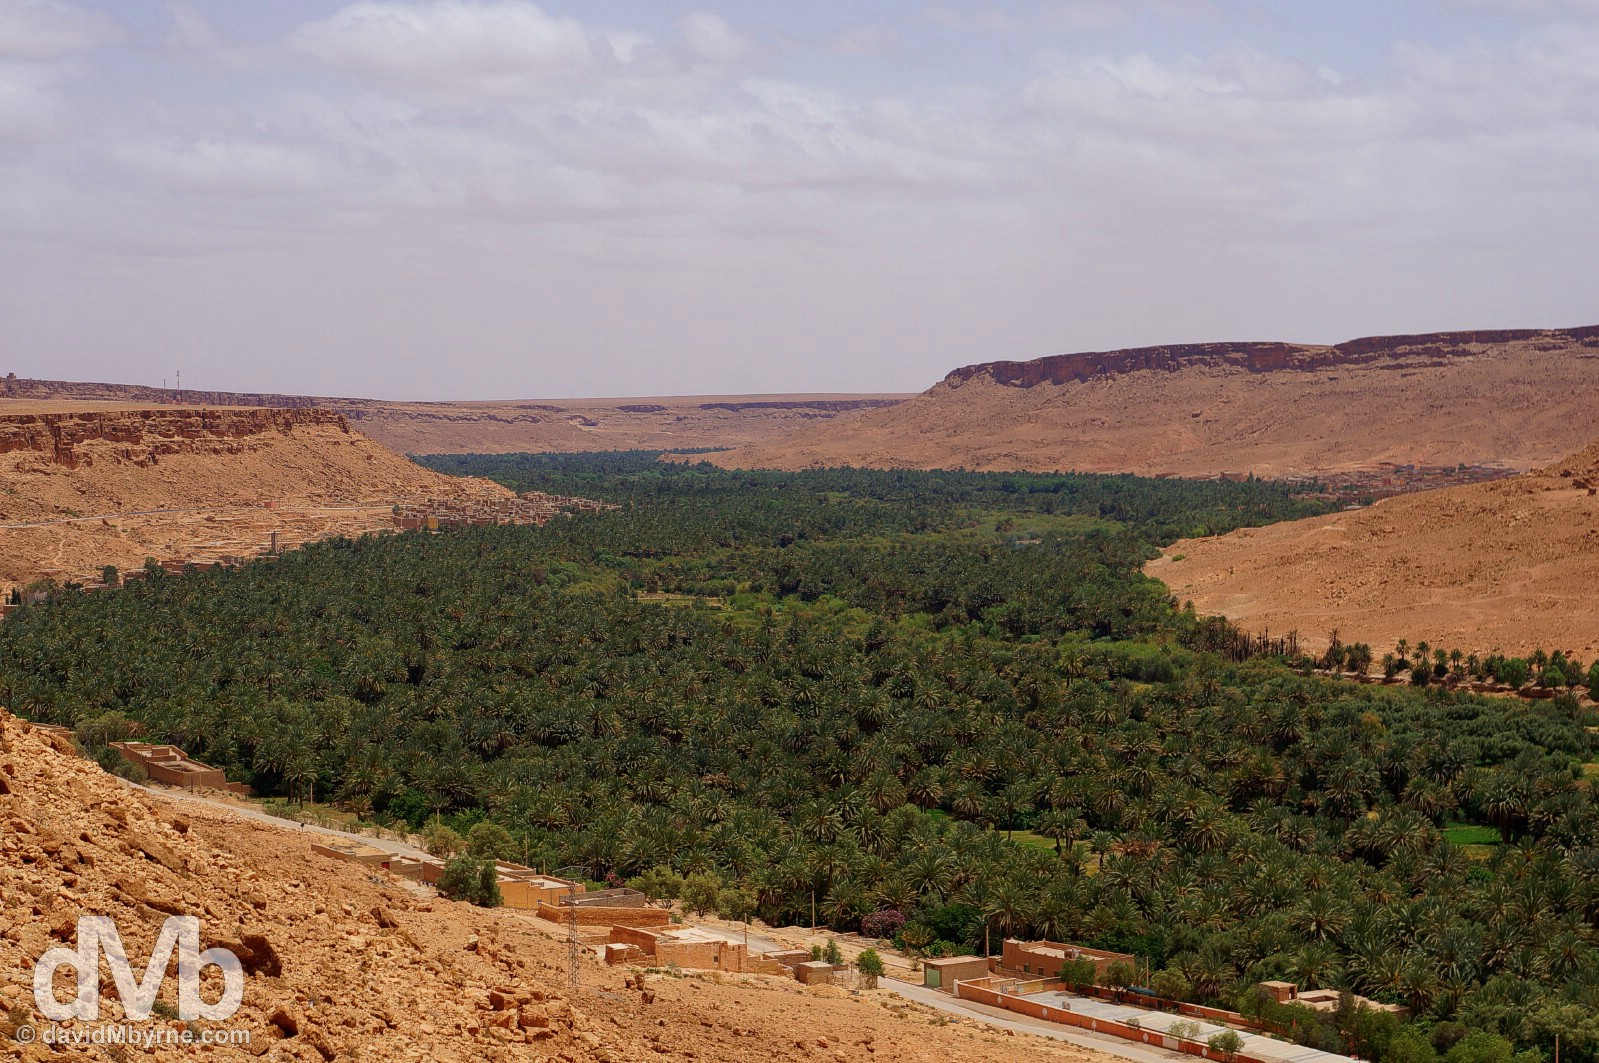 A vast palmarie resting in a lush river valley as seen from the N13 between Er Rachidia and Merzouga, southeastern Morocco. May 18, 2014.